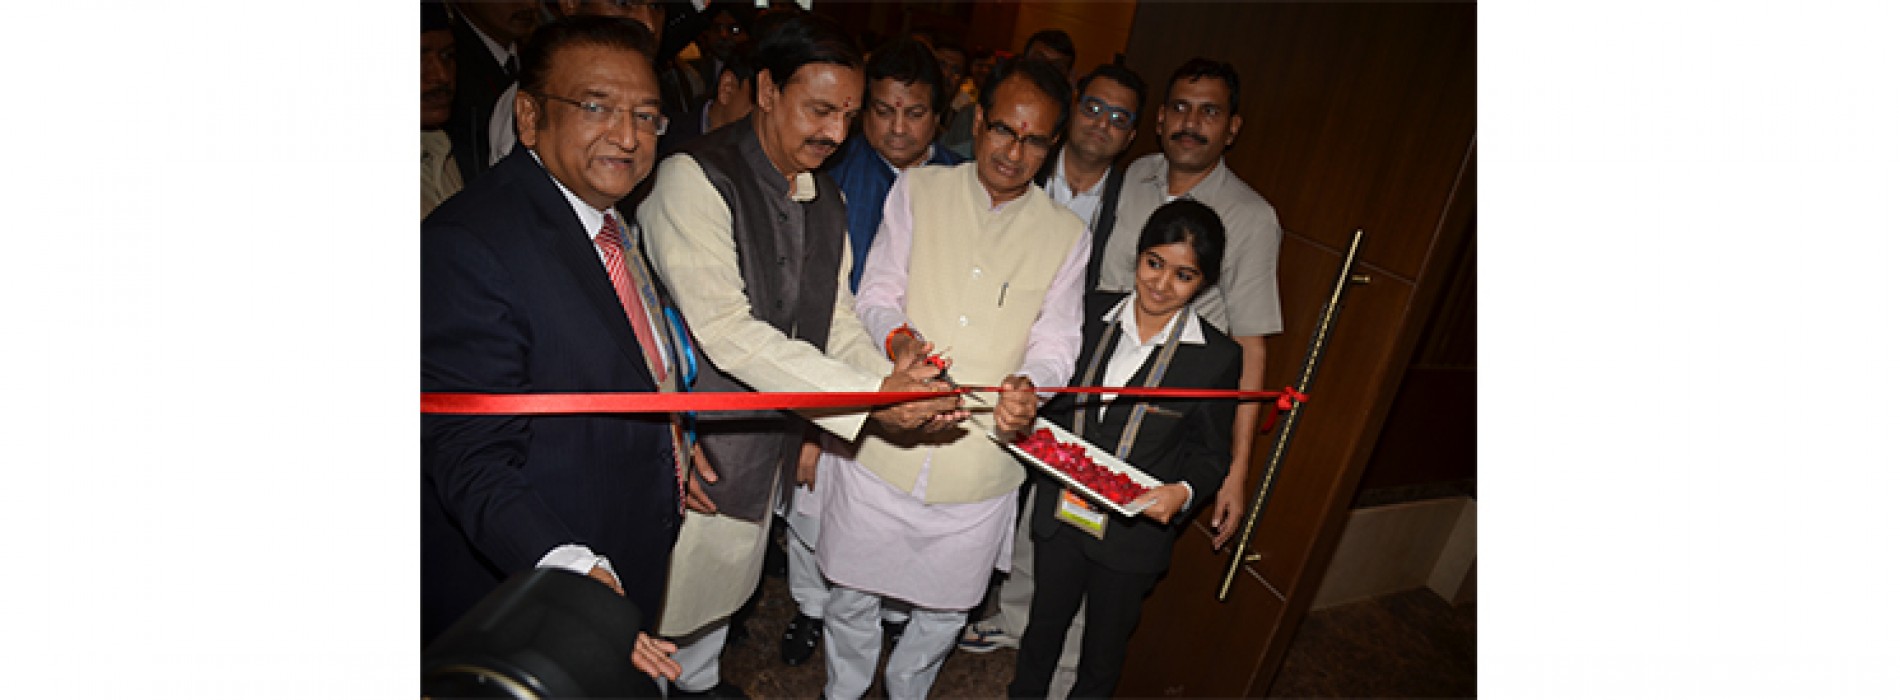 31st IATO Convention successfully concludes in Indore